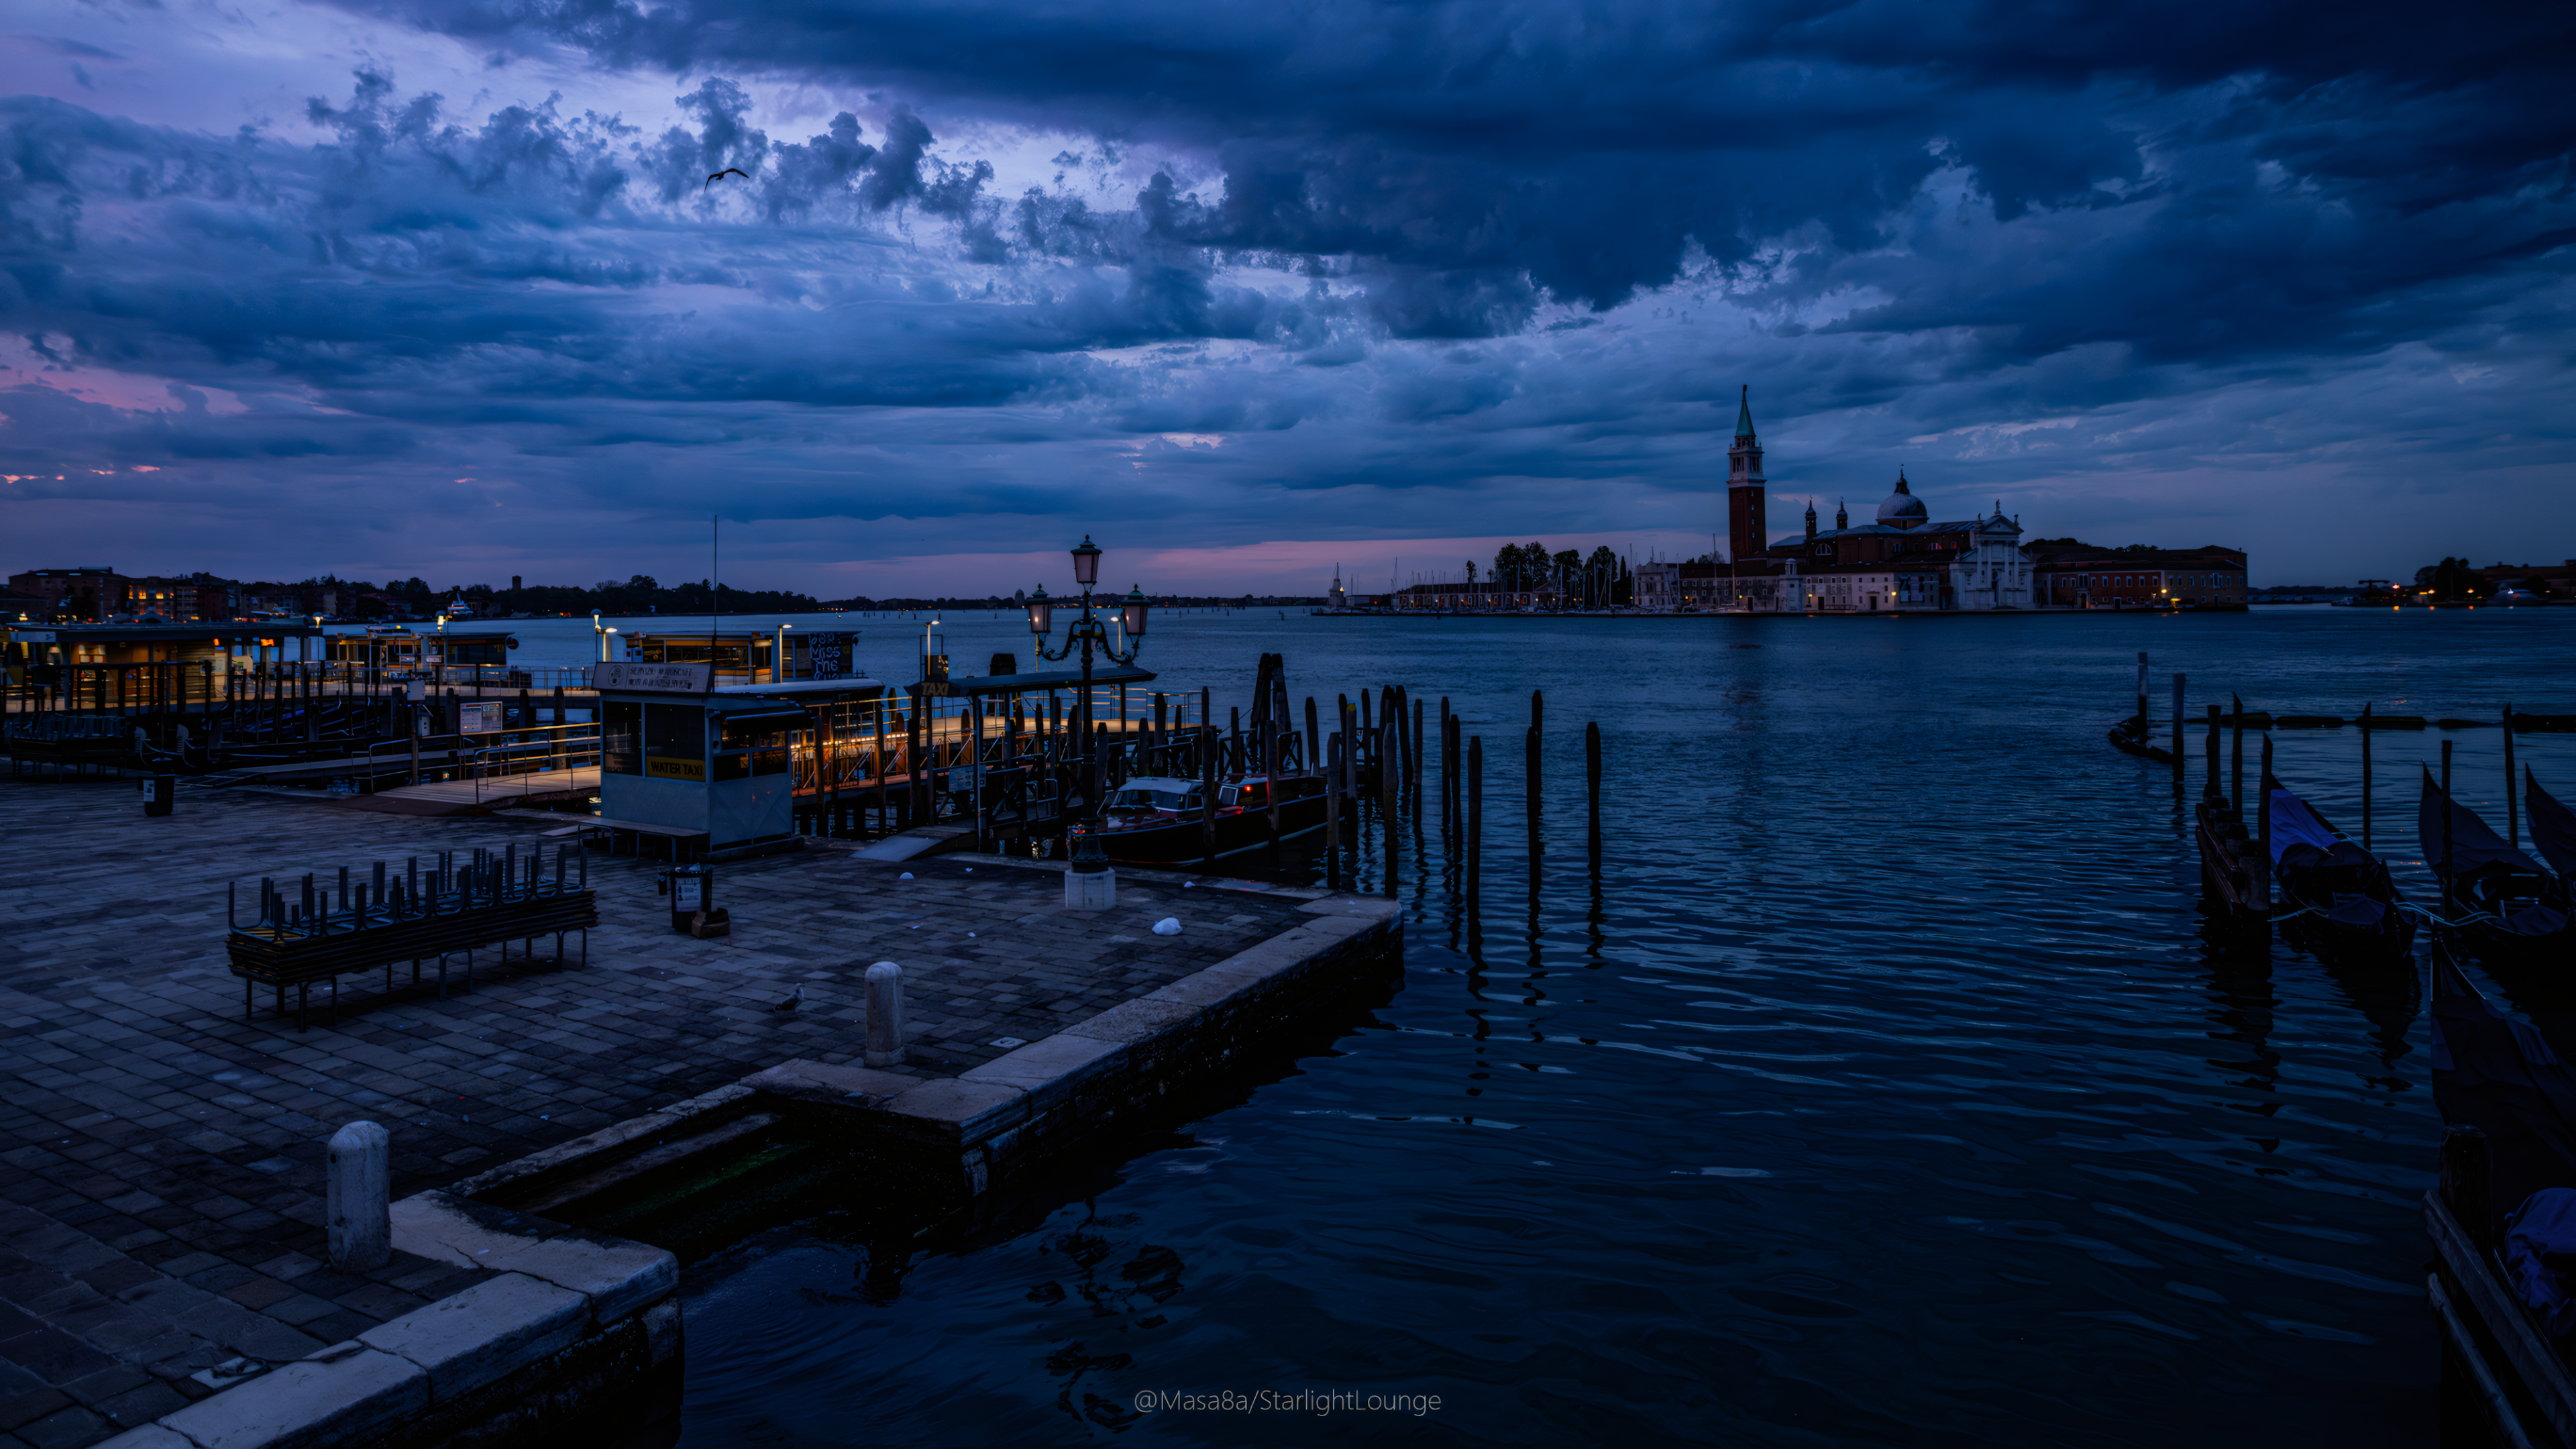 General 3840x2160 Masa8a photography sea dock boat clouds street light Venice gondolas low light Italy watermarked water